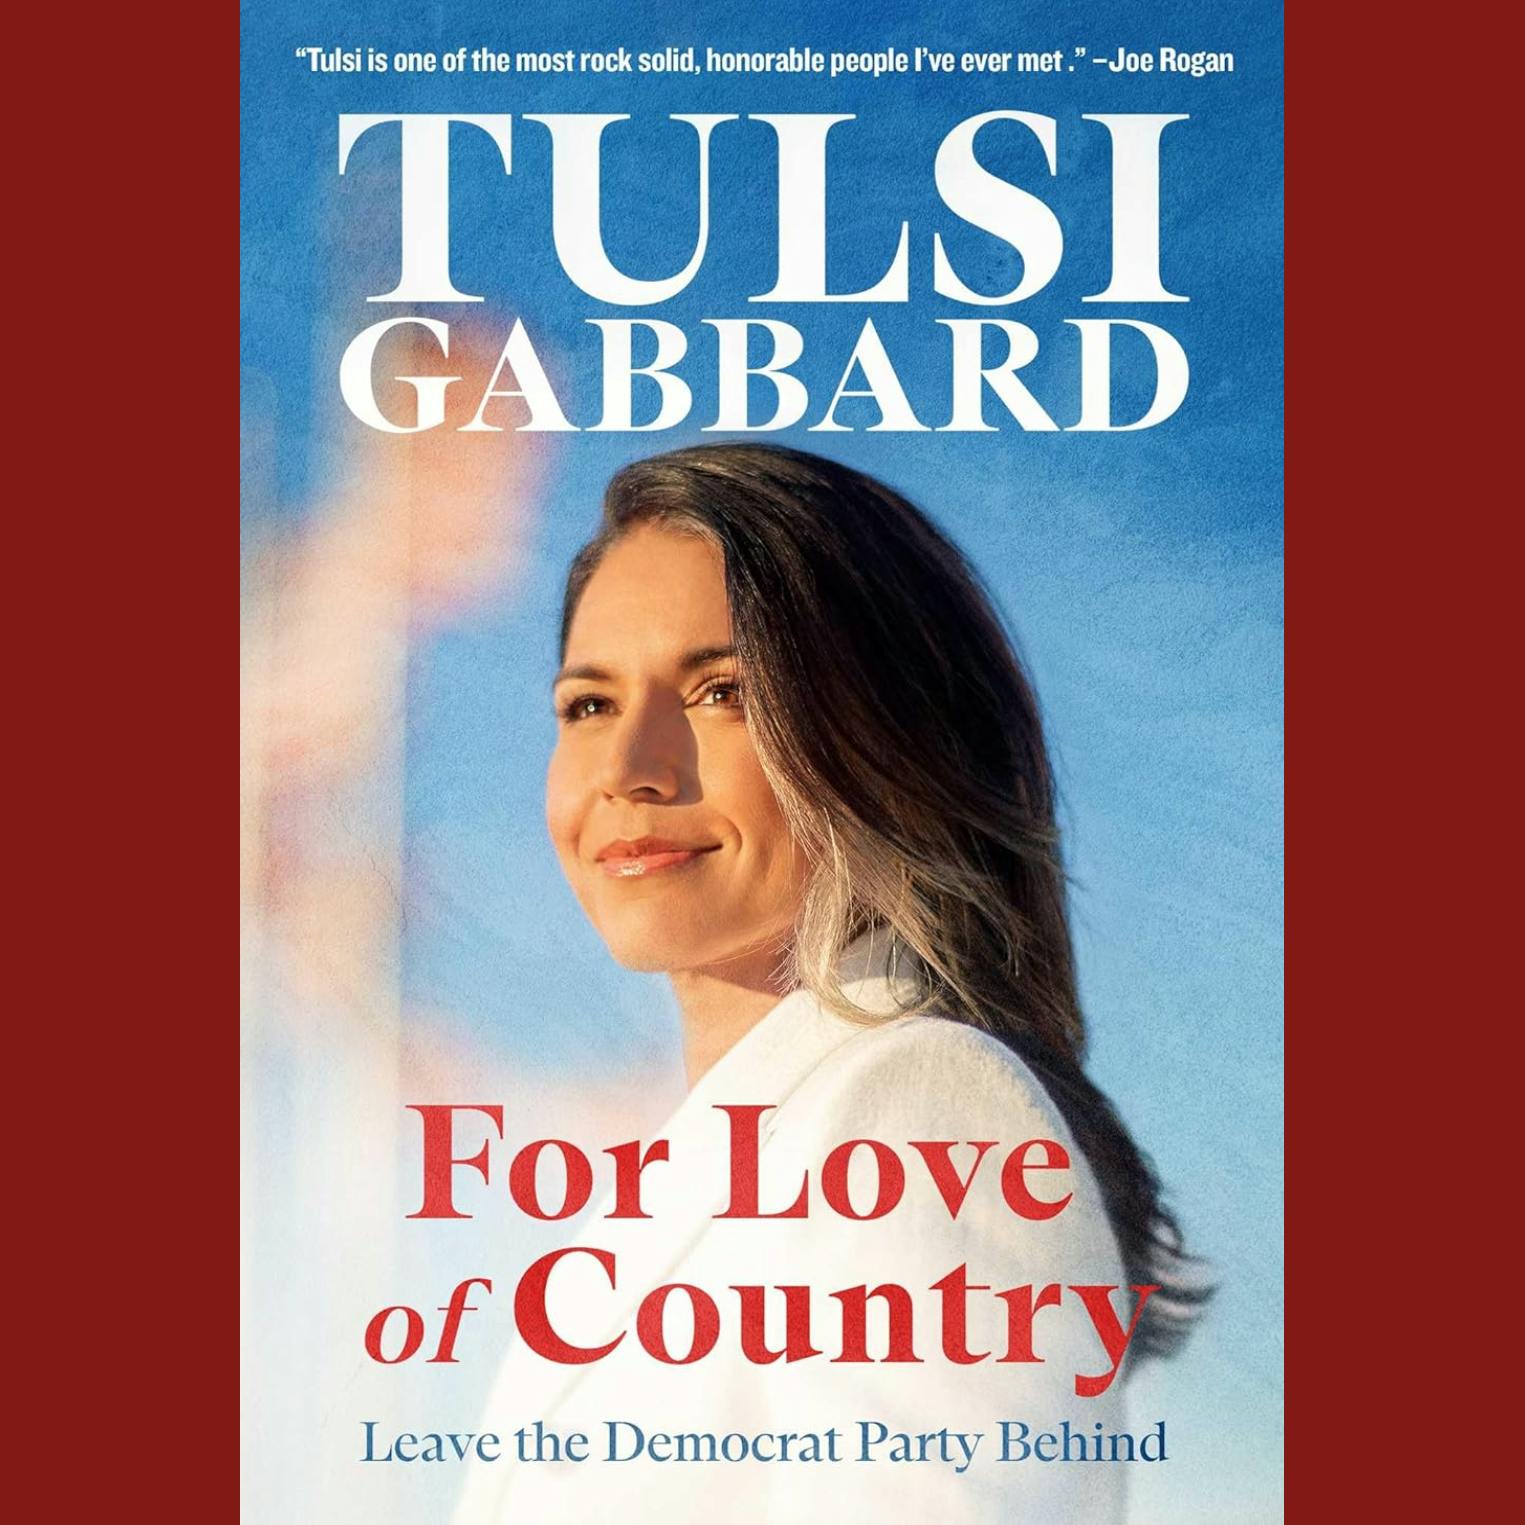 Why Tulsi Gabbard Left the Democratic Party